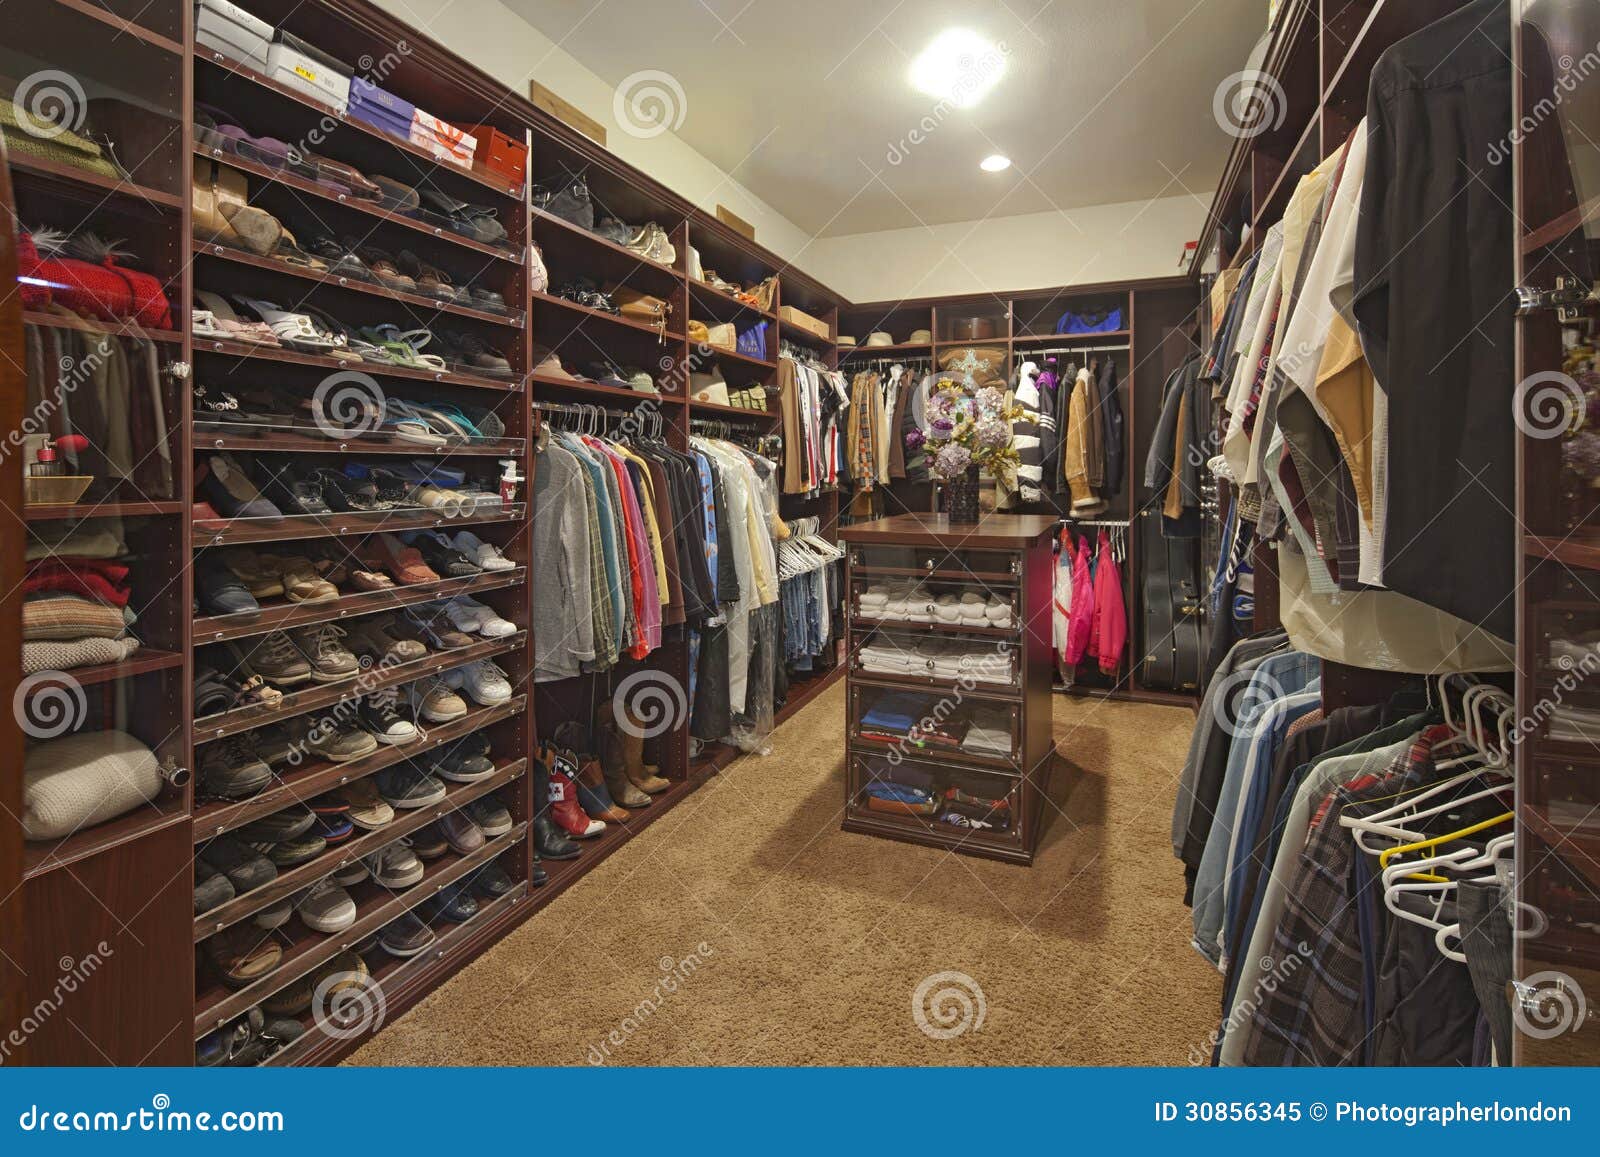 walk in closet with organized clothing